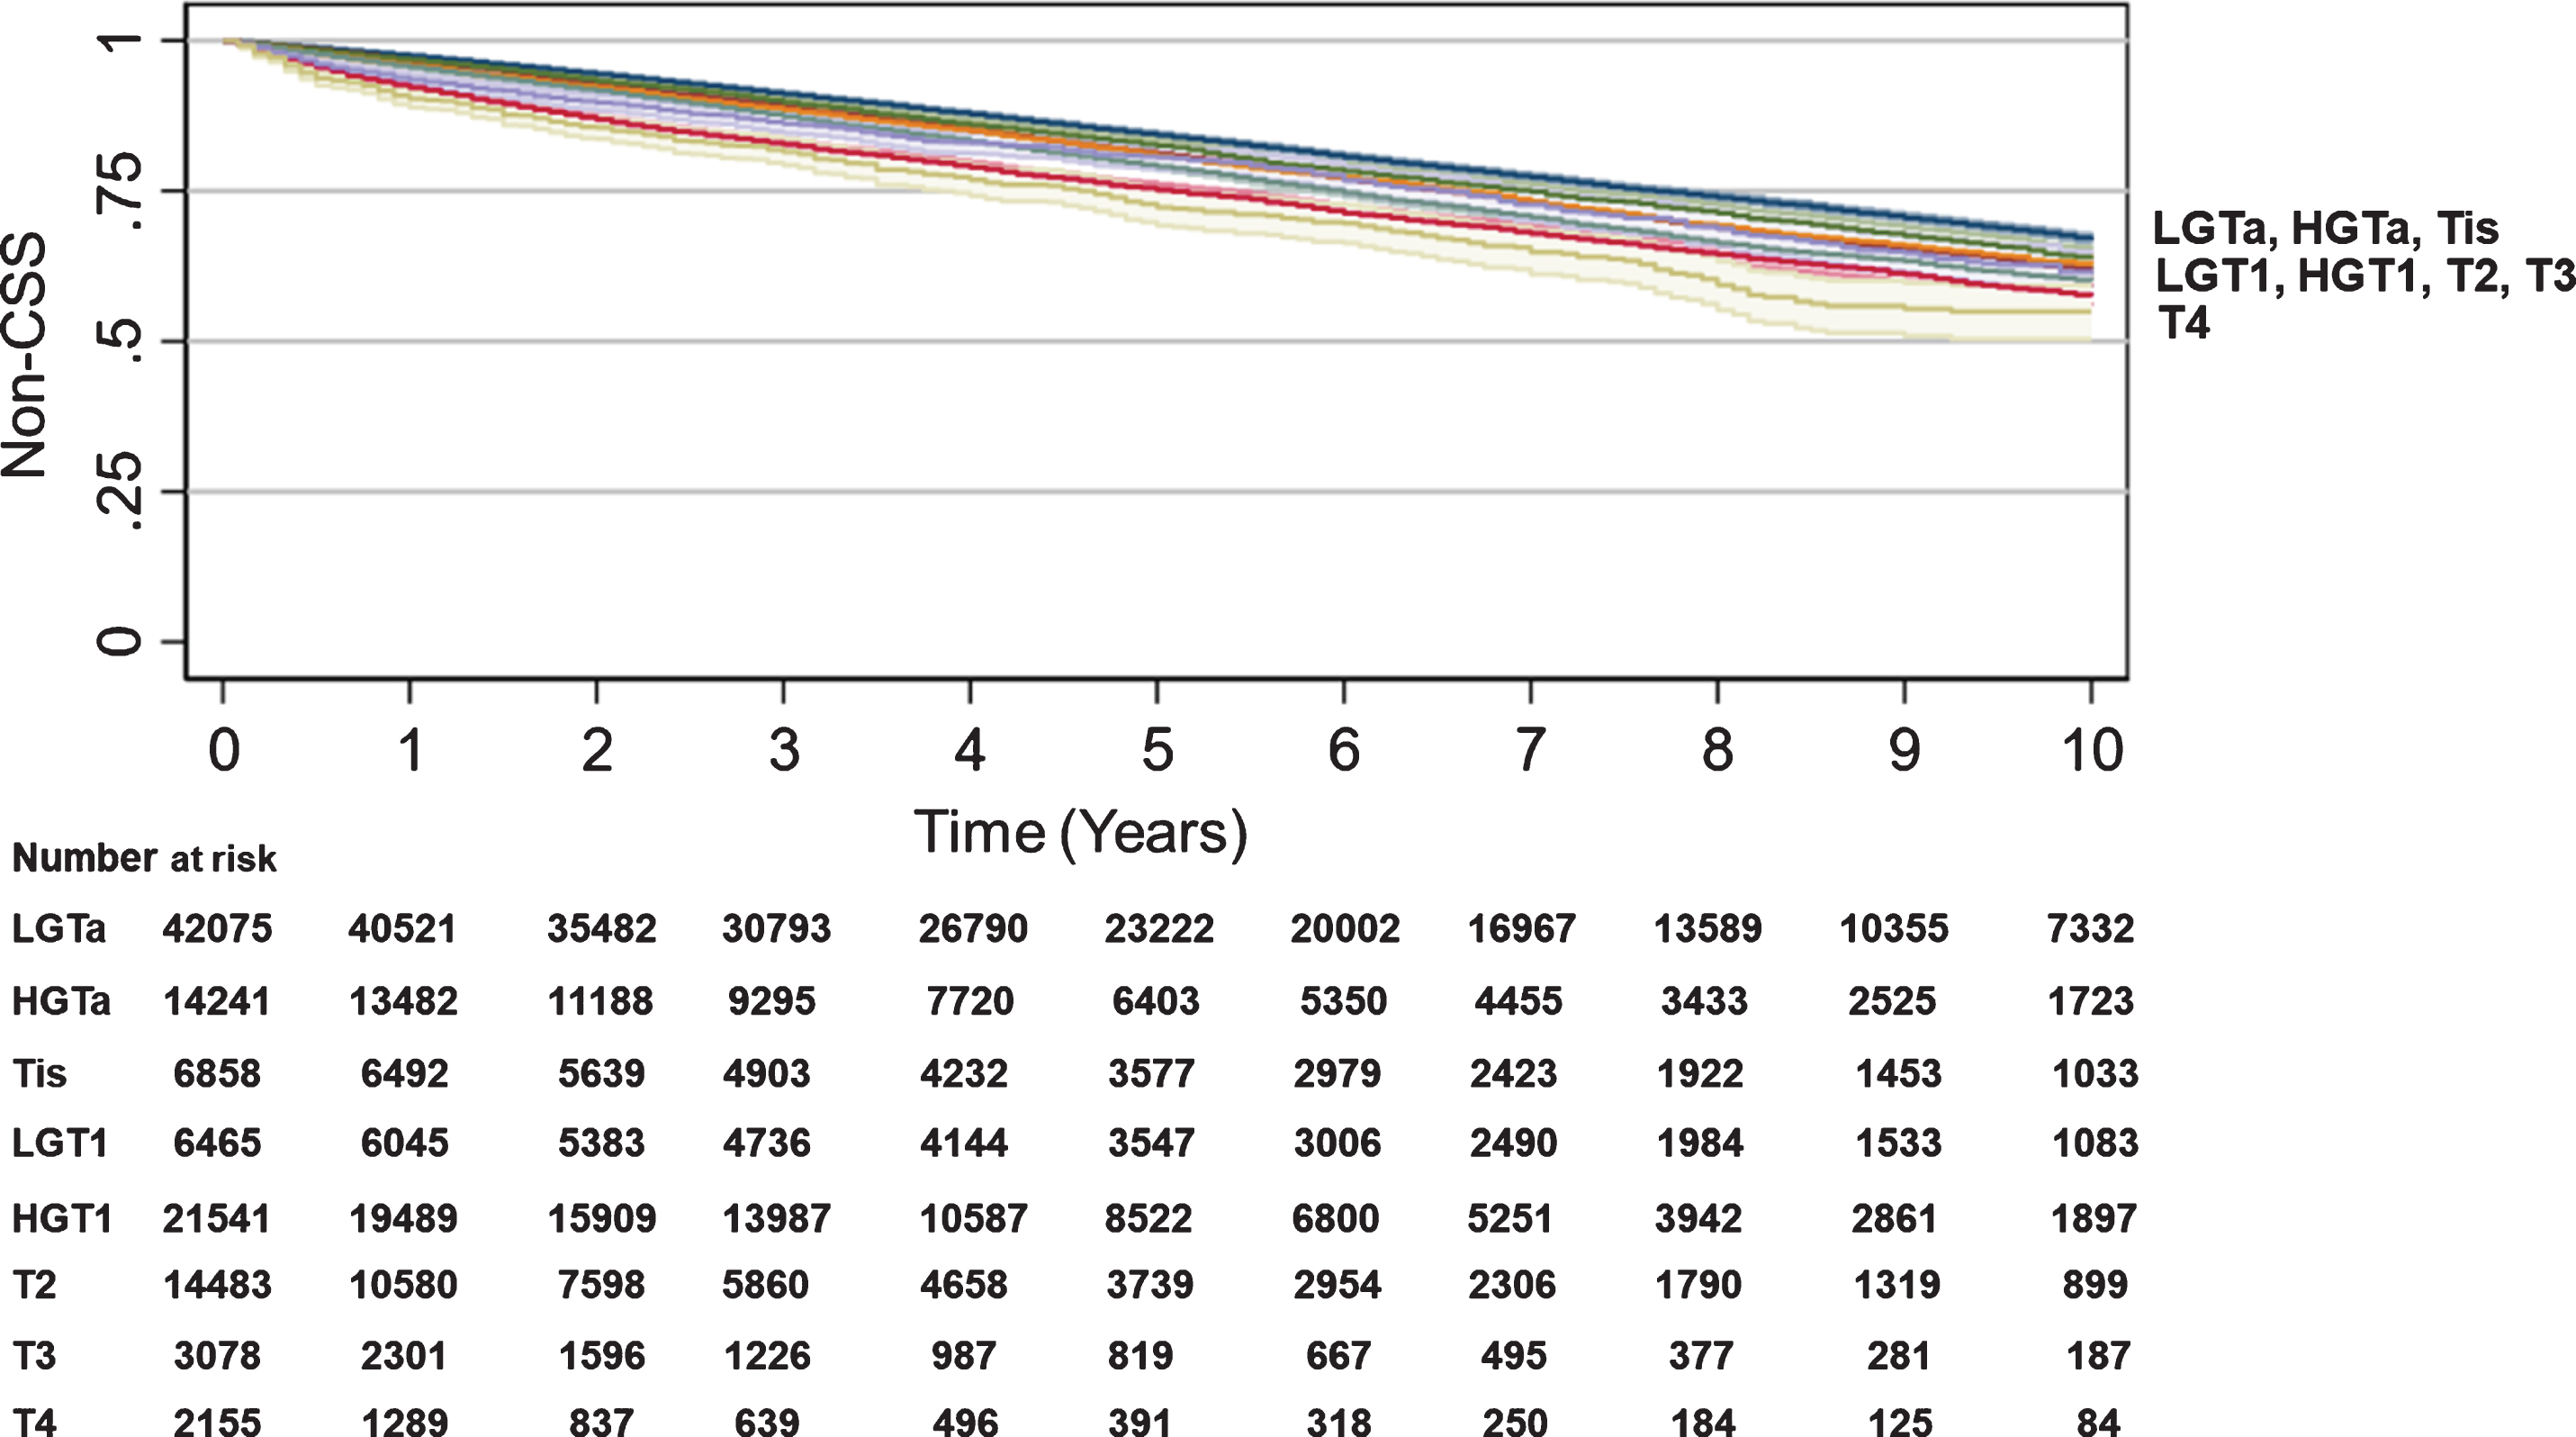 Trend in Non-cancer-specific survival by BC T stage. Kaplan-Meier analyses were performed to estimate Non-CSS using SEER data with LGTa as a reference. Blue (LGTa), maroon (HGTa), green (Tis), orange (LGT1), teal (HGT1), red (T2), purple (T3), yellow (T4). Shading represents 95% CI. For SEER, OS hazard ratios, 95% CI, and p values when compared to LGTa were HGTa (1.01, CI 0.97–1.05, p = 0.735), Tis (0.99, CI 0.94–1.05, p = 0.812), LGT1 (1.15, CI 1.09–1.21, p < 0.001), HGT1 (1.14, CI 1.10–1.18, p < 0.001), T2 (1.44, CI 1.38–1.50, p < 0.001), T3 (1.39, CI 1.28–1.52, p < 0.001), T4 (1.77, CI 1.60–1.96, p < 0.001).